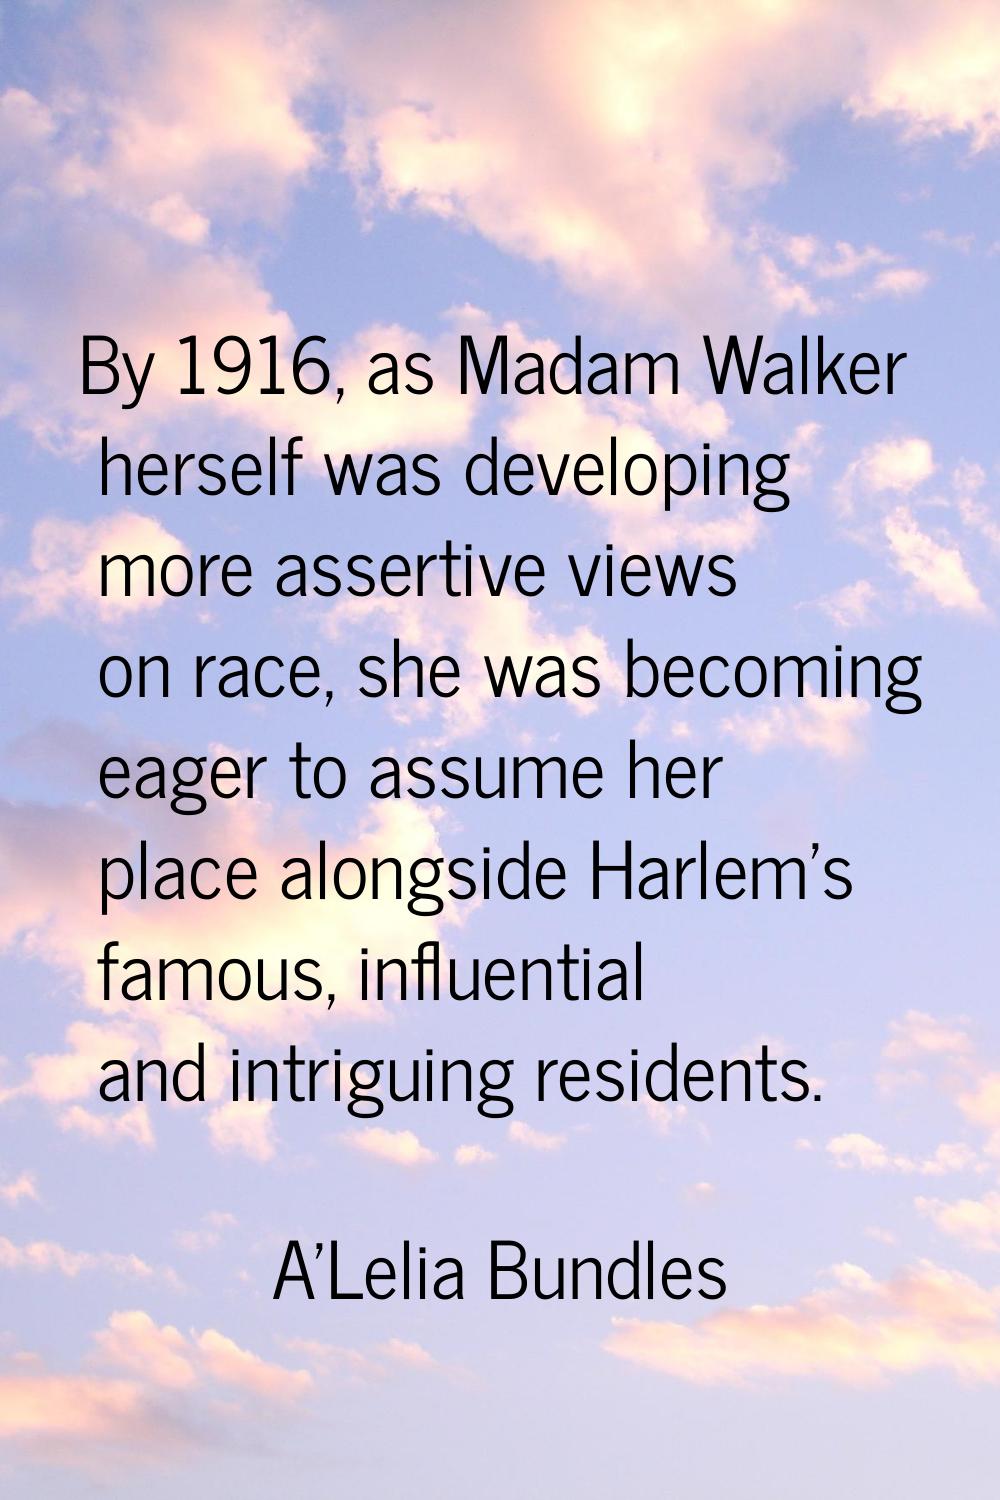 By 1916, as Madam Walker herself was developing more assertive views on race, she was becoming eage